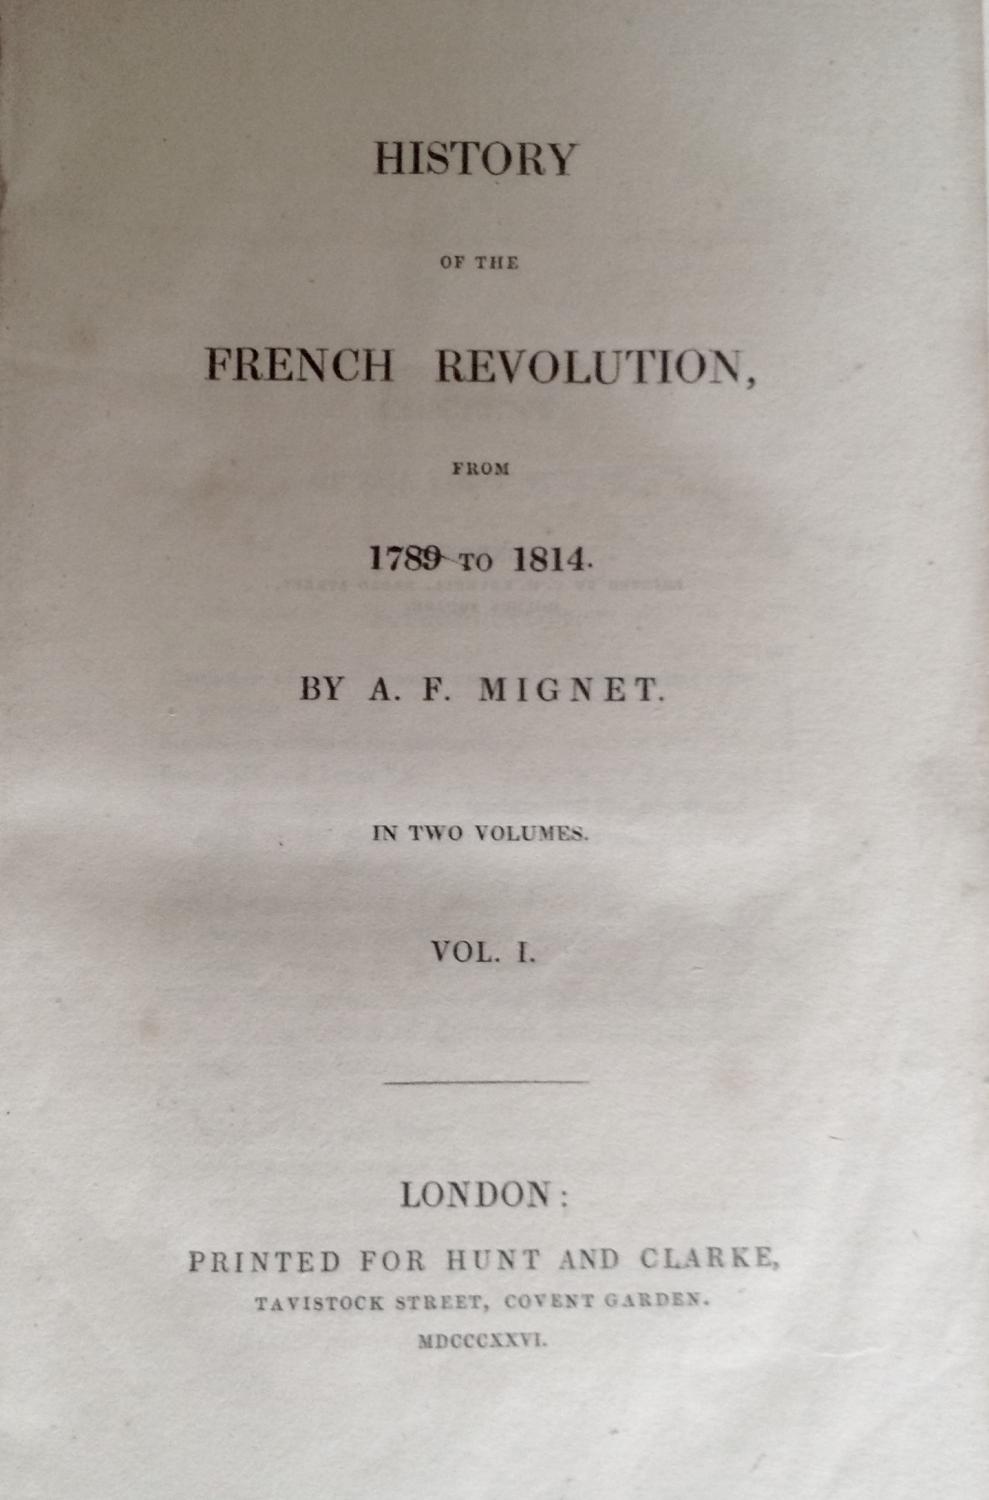 History of The French Revolution 1789 - 1814 in 2 volumes by A F Mignet ...